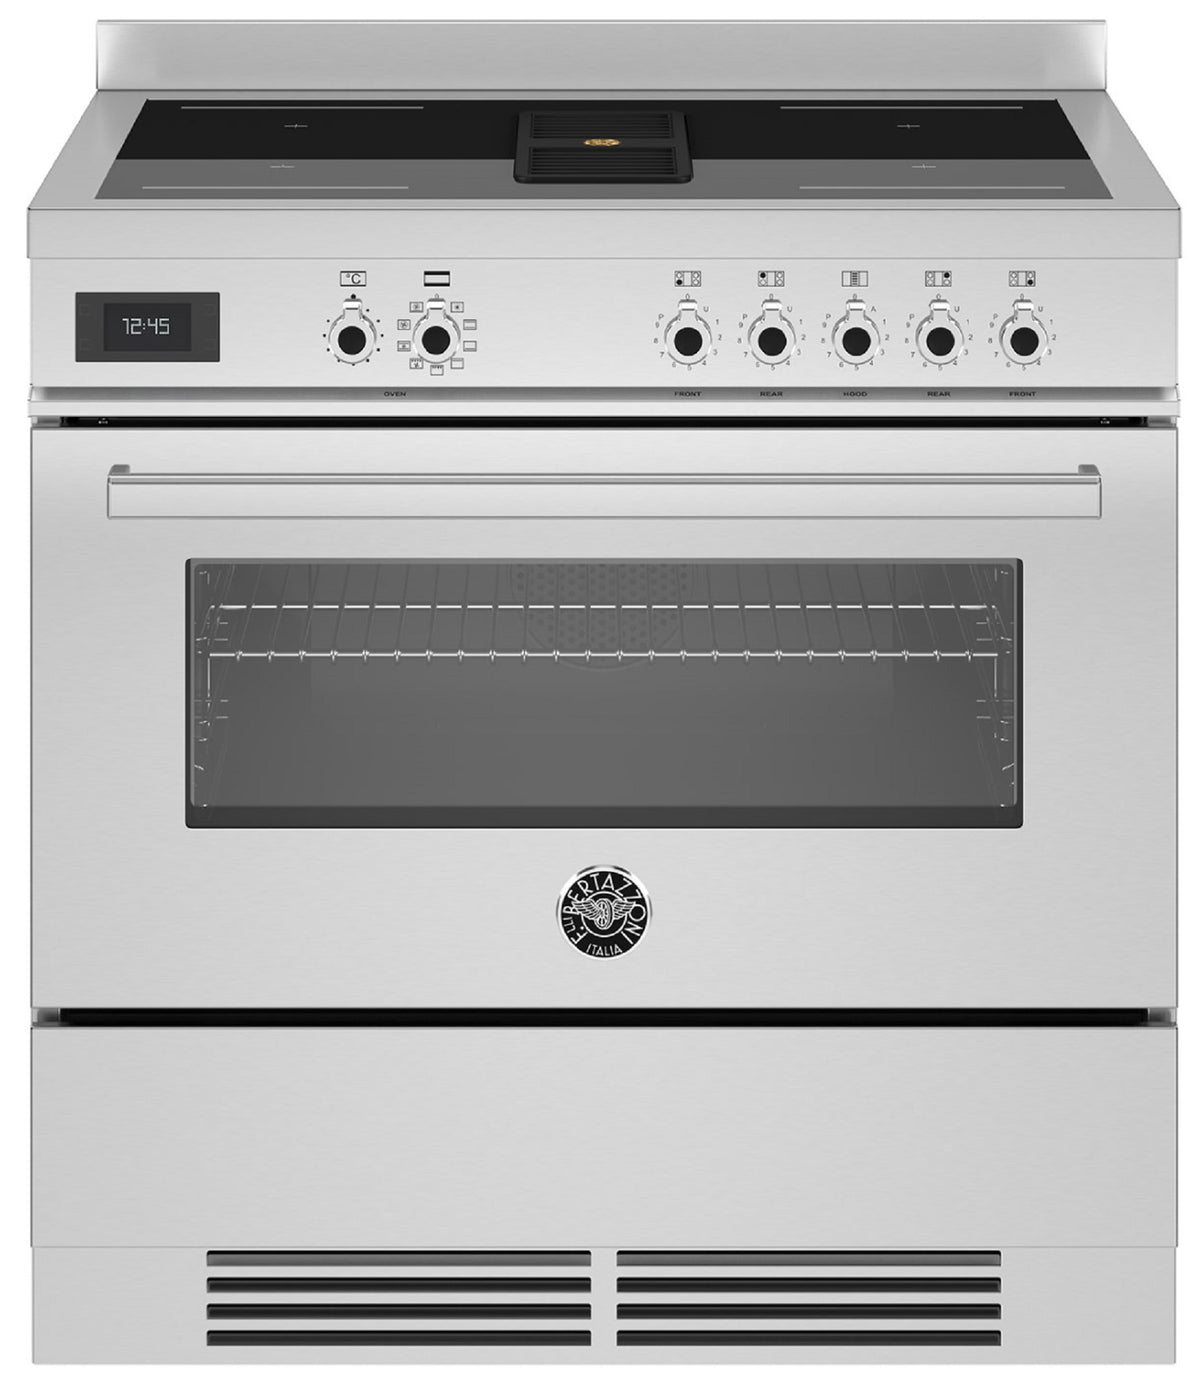 BERTAZZONI PROCH94I1EXT 90cm Electric Oven 5 Zone Induction Hob with in-built Extractor Range Cooker in Stainless Steel